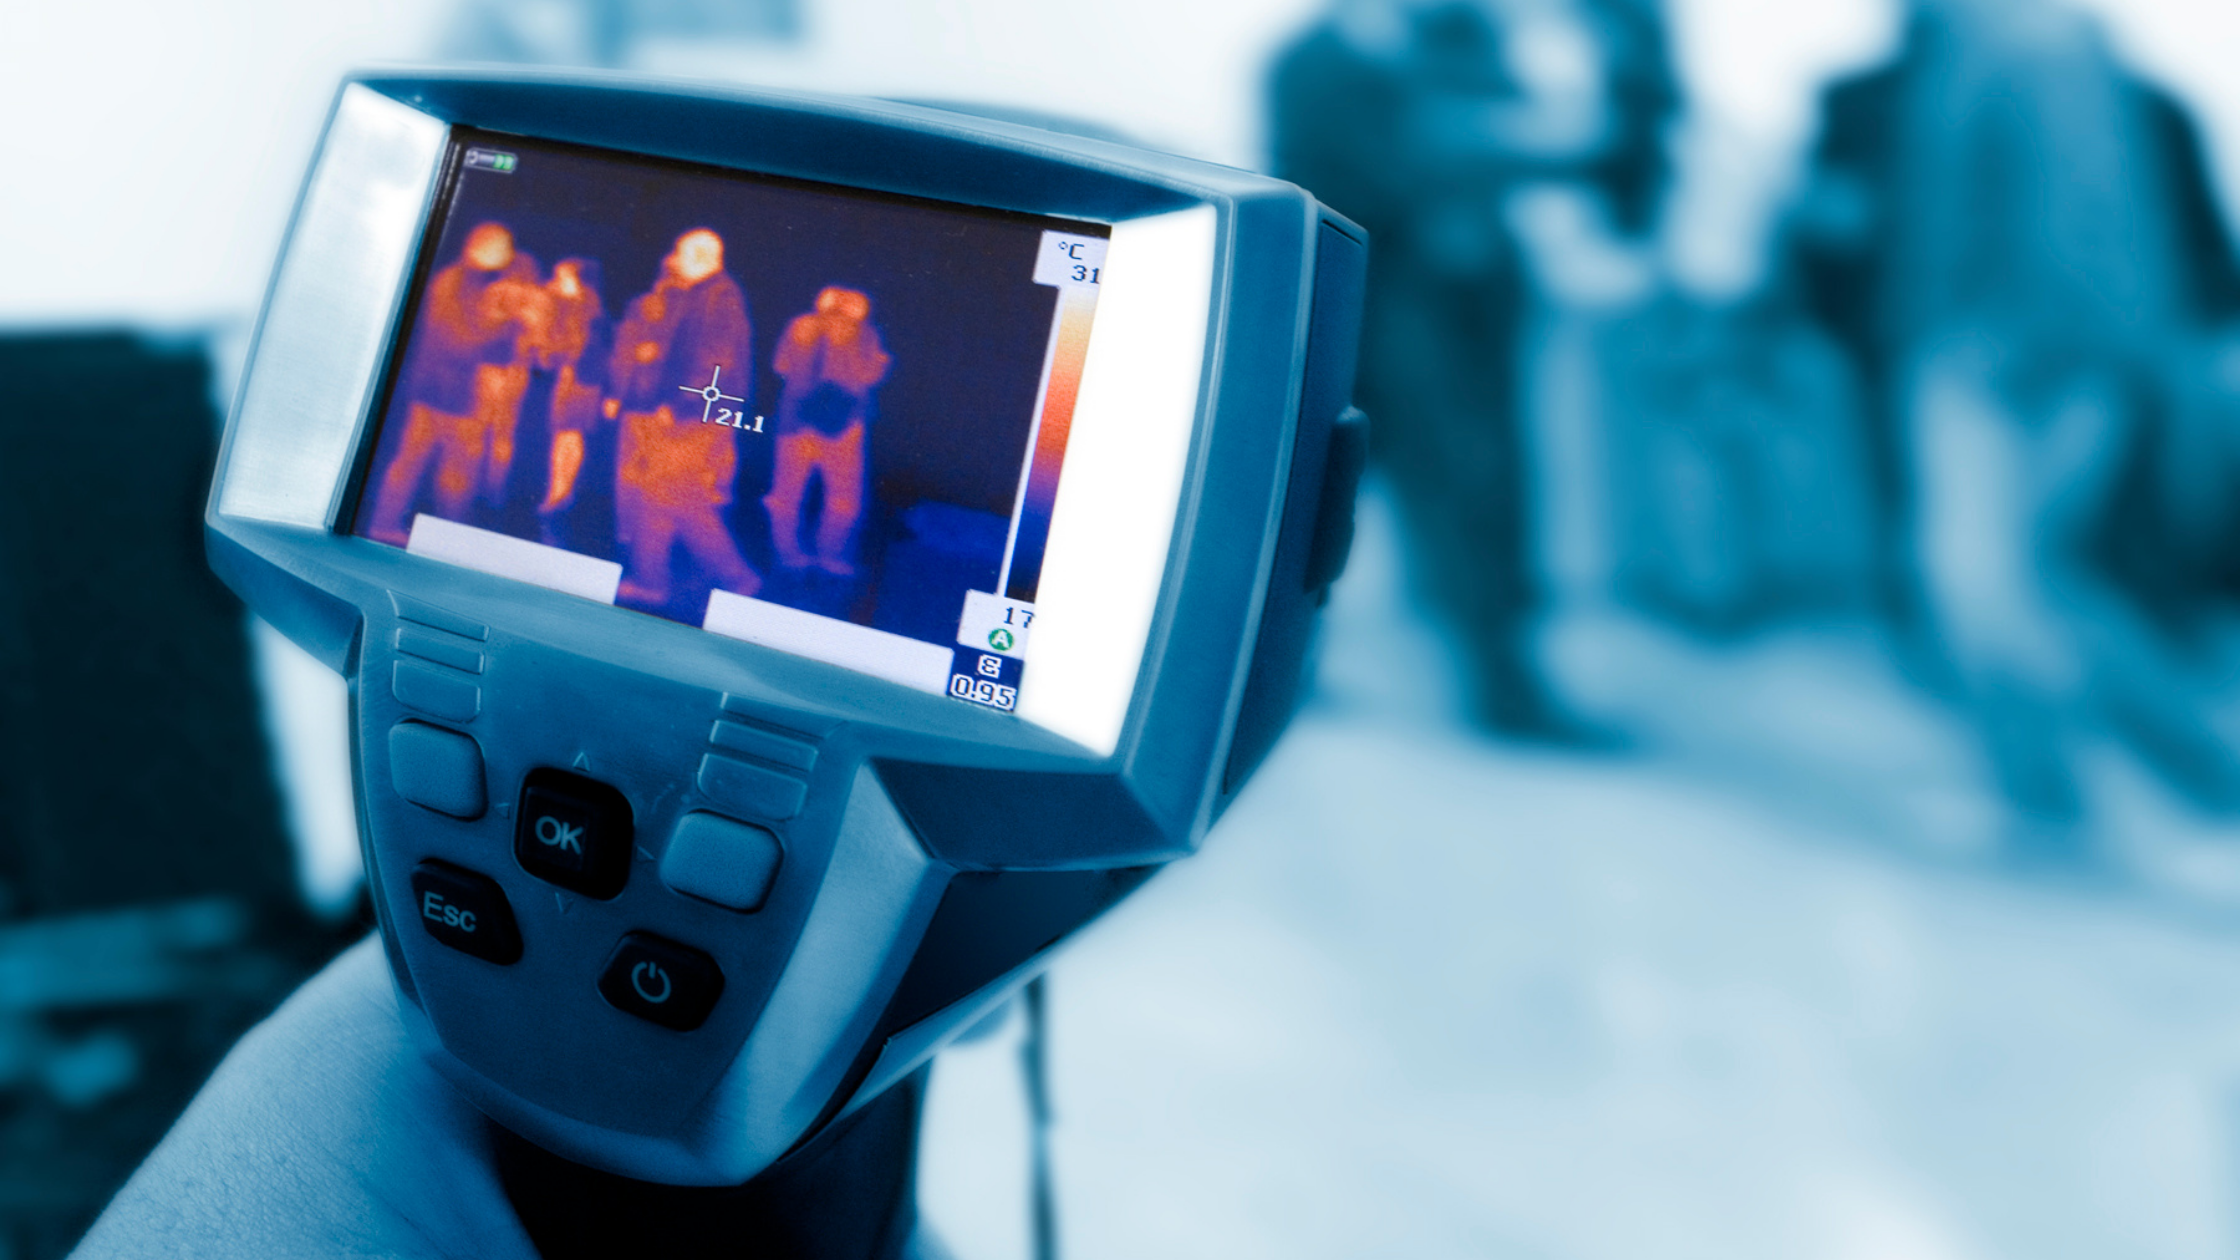 COVID-19 has benefited something: The Smart Thermal Camera